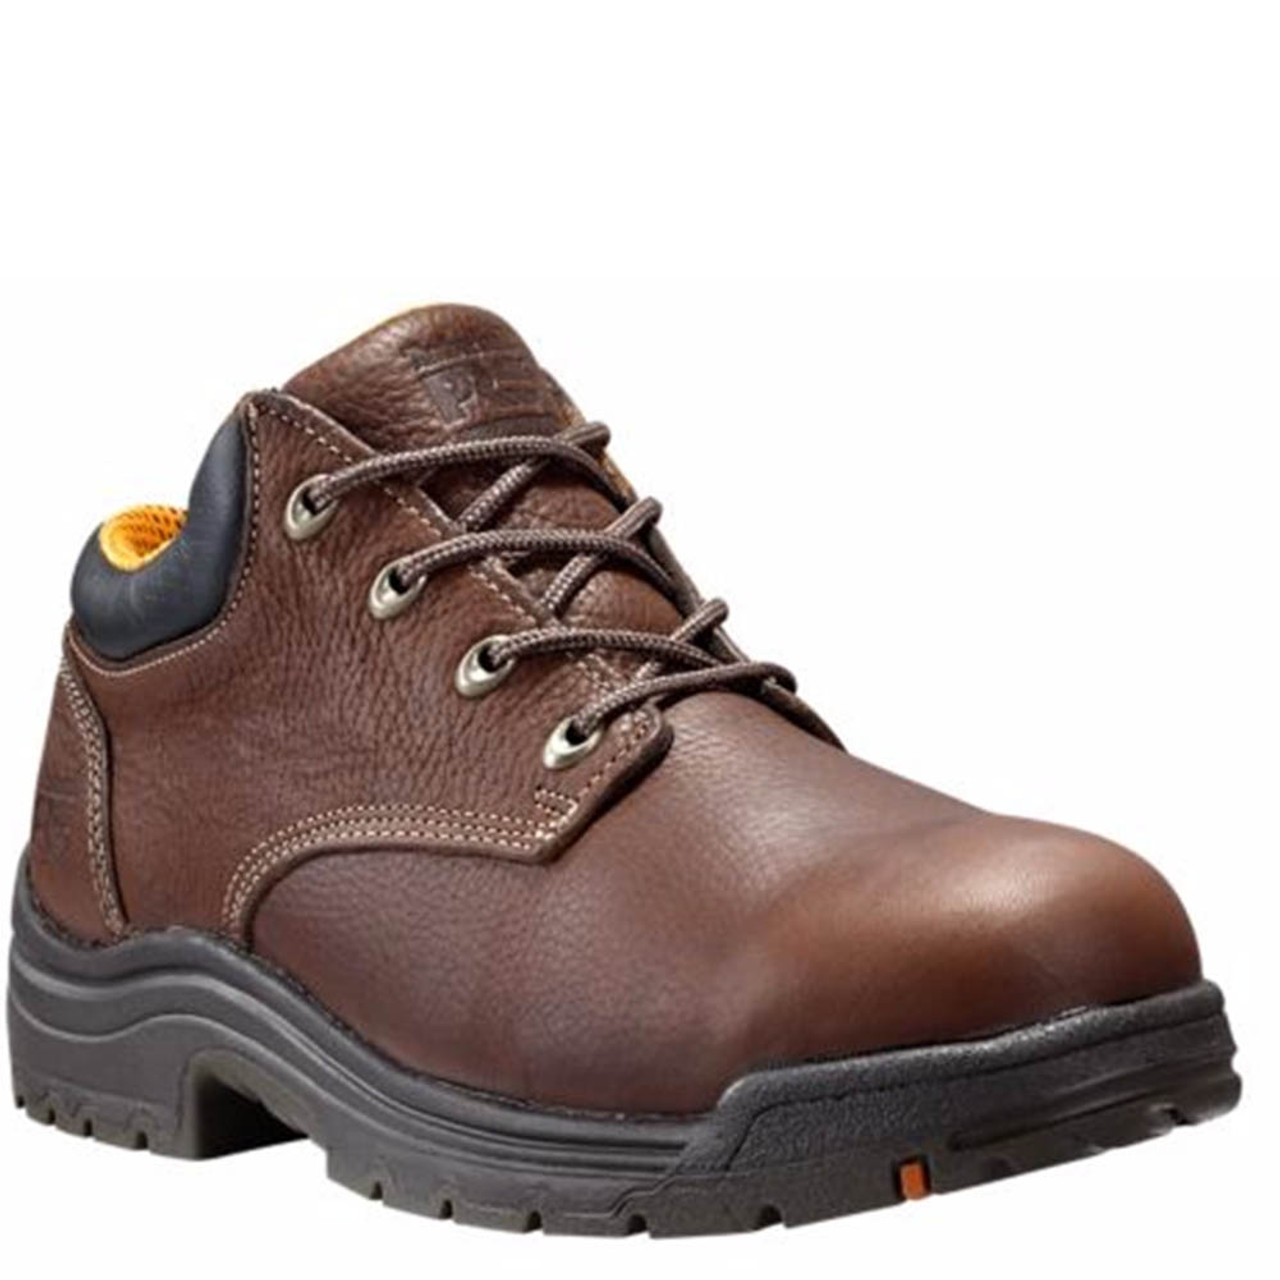 Timberland PRO 47028 Titan Safety Toe Work Shoes - Family Footwear Center